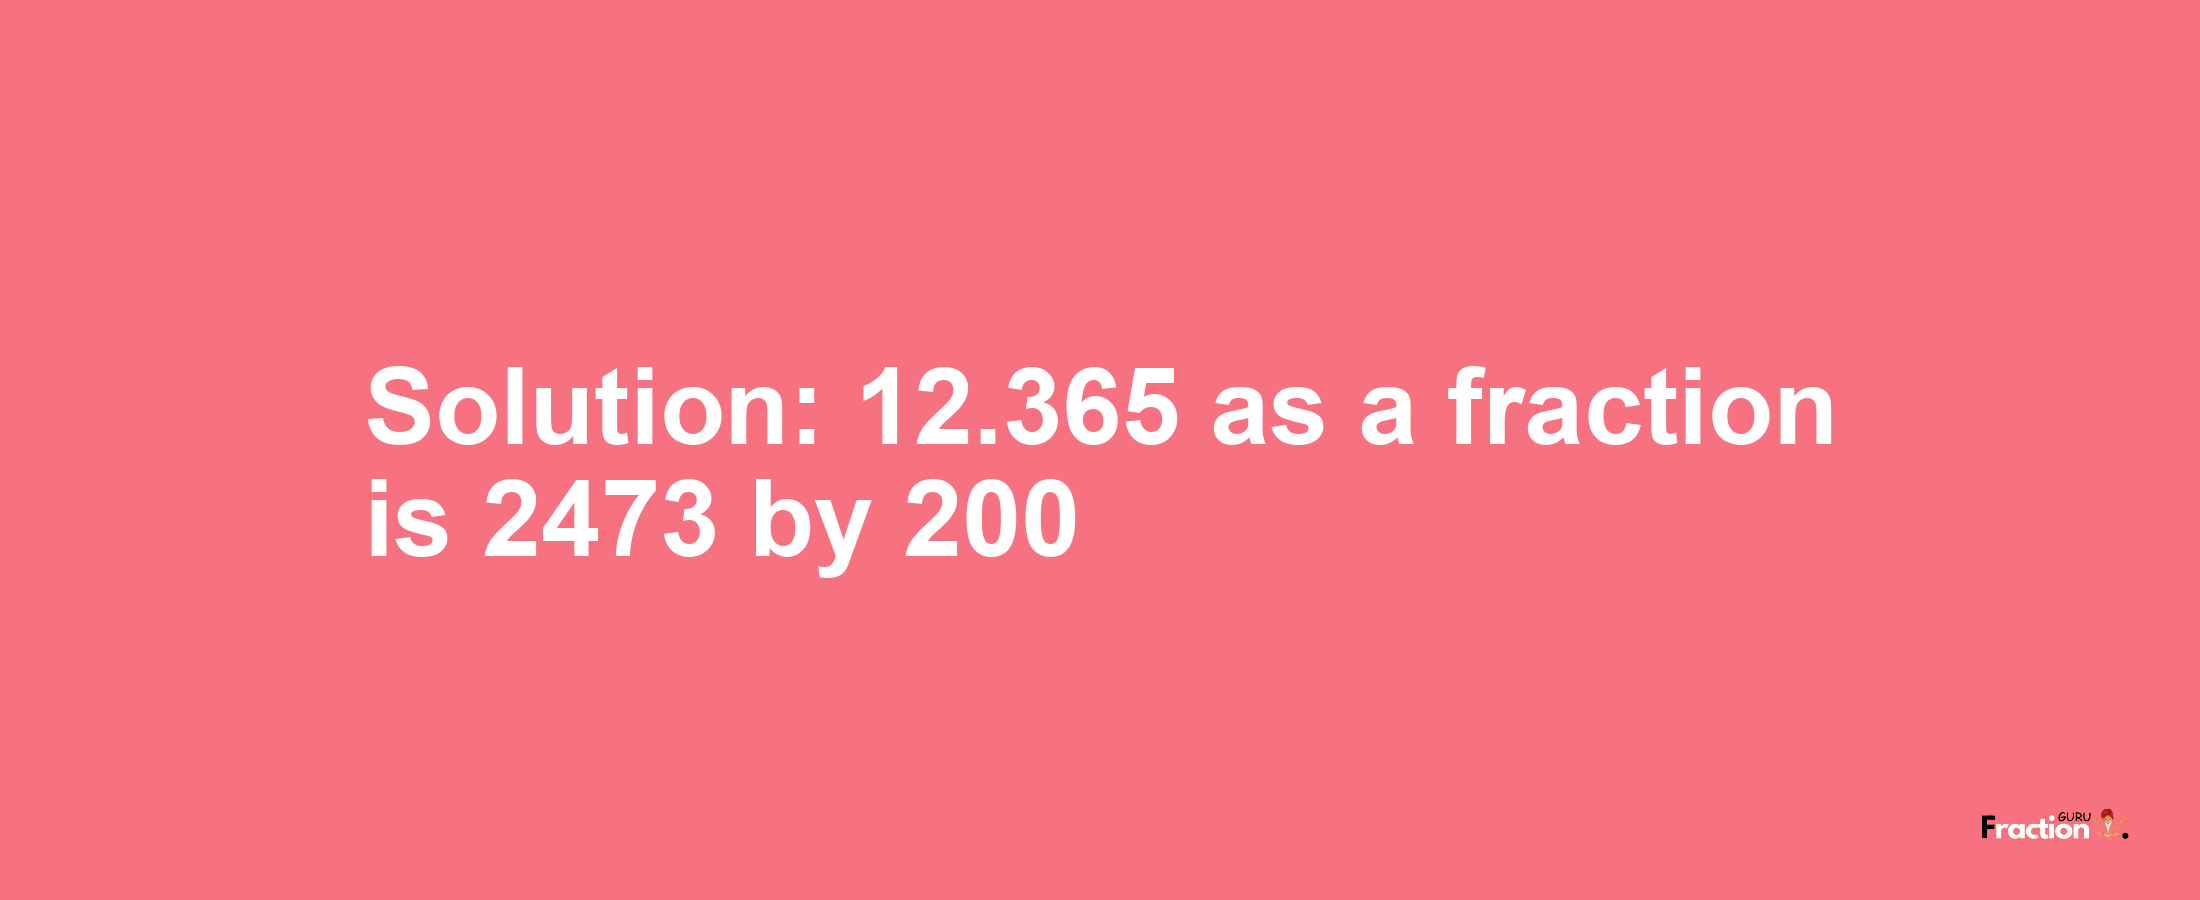 Solution:12.365 as a fraction is 2473/200